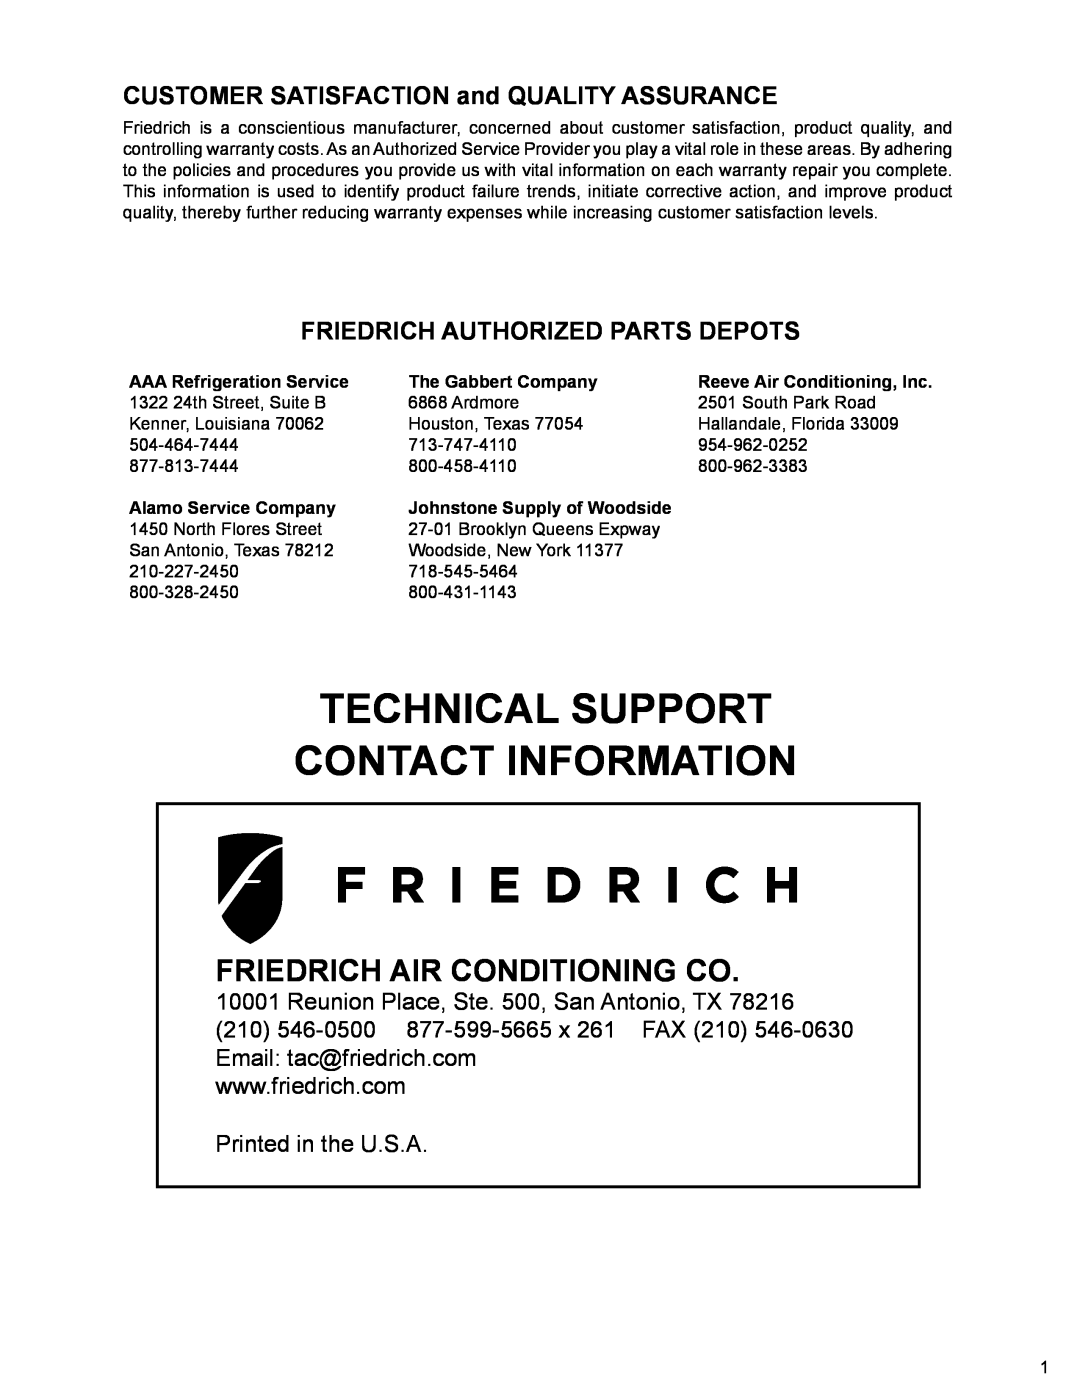 Friedrich MW18Y3H Technical Support Contact Information, CUSTOMER SATISFACTION and QUALITY ASSURANCE, The Gabbert Company 